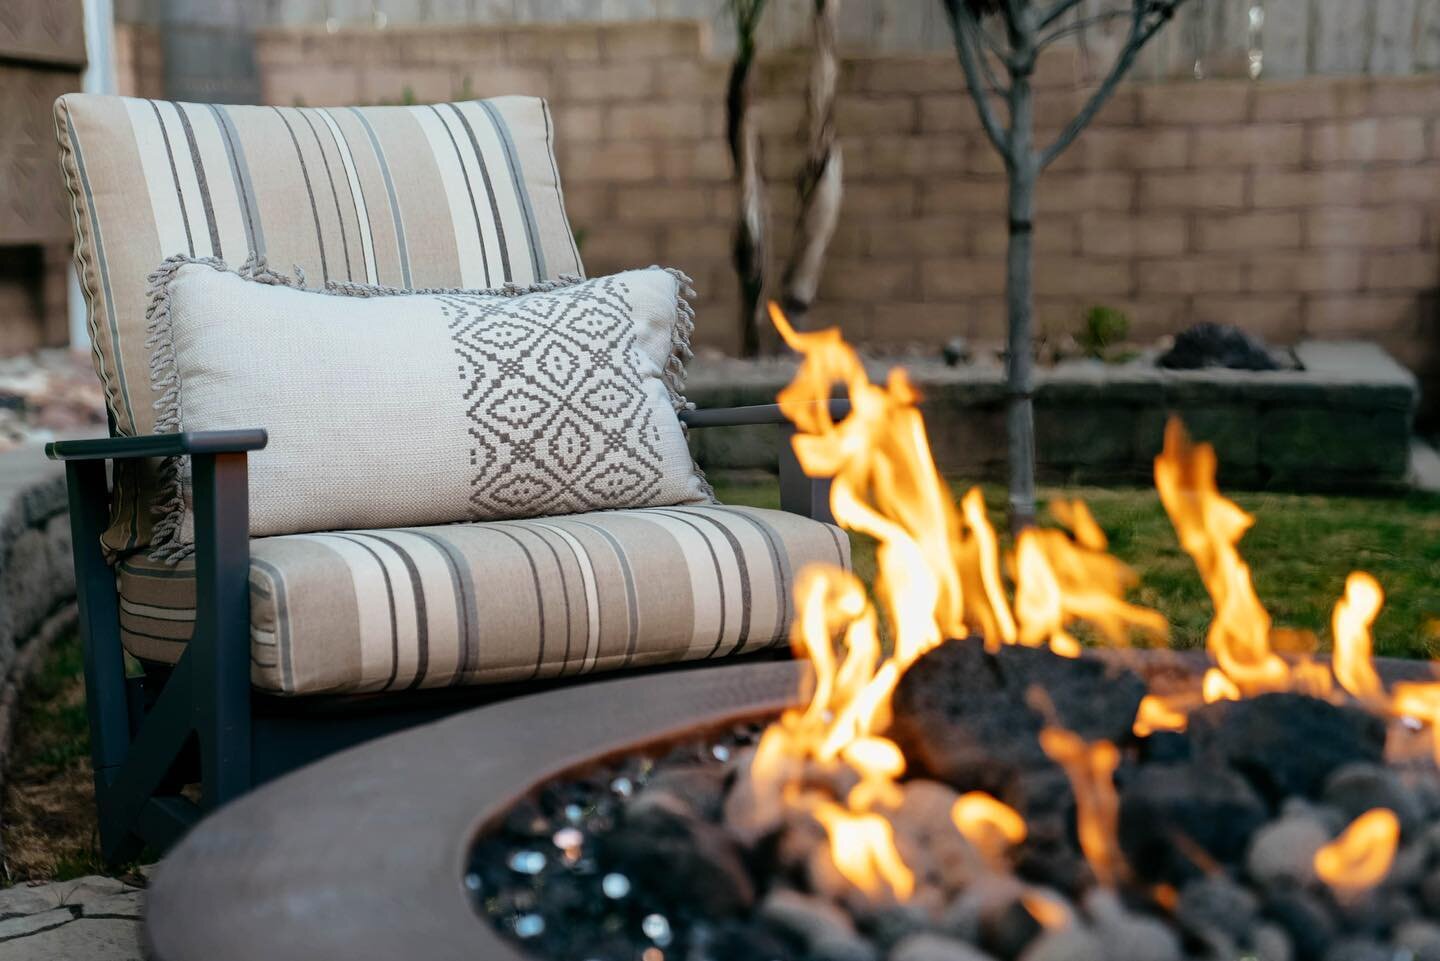 TIP: It is recommended to have moveable seating that can move closer/further from a fire feature versus stationary built-in seating, to control the amount of warmth one receives.